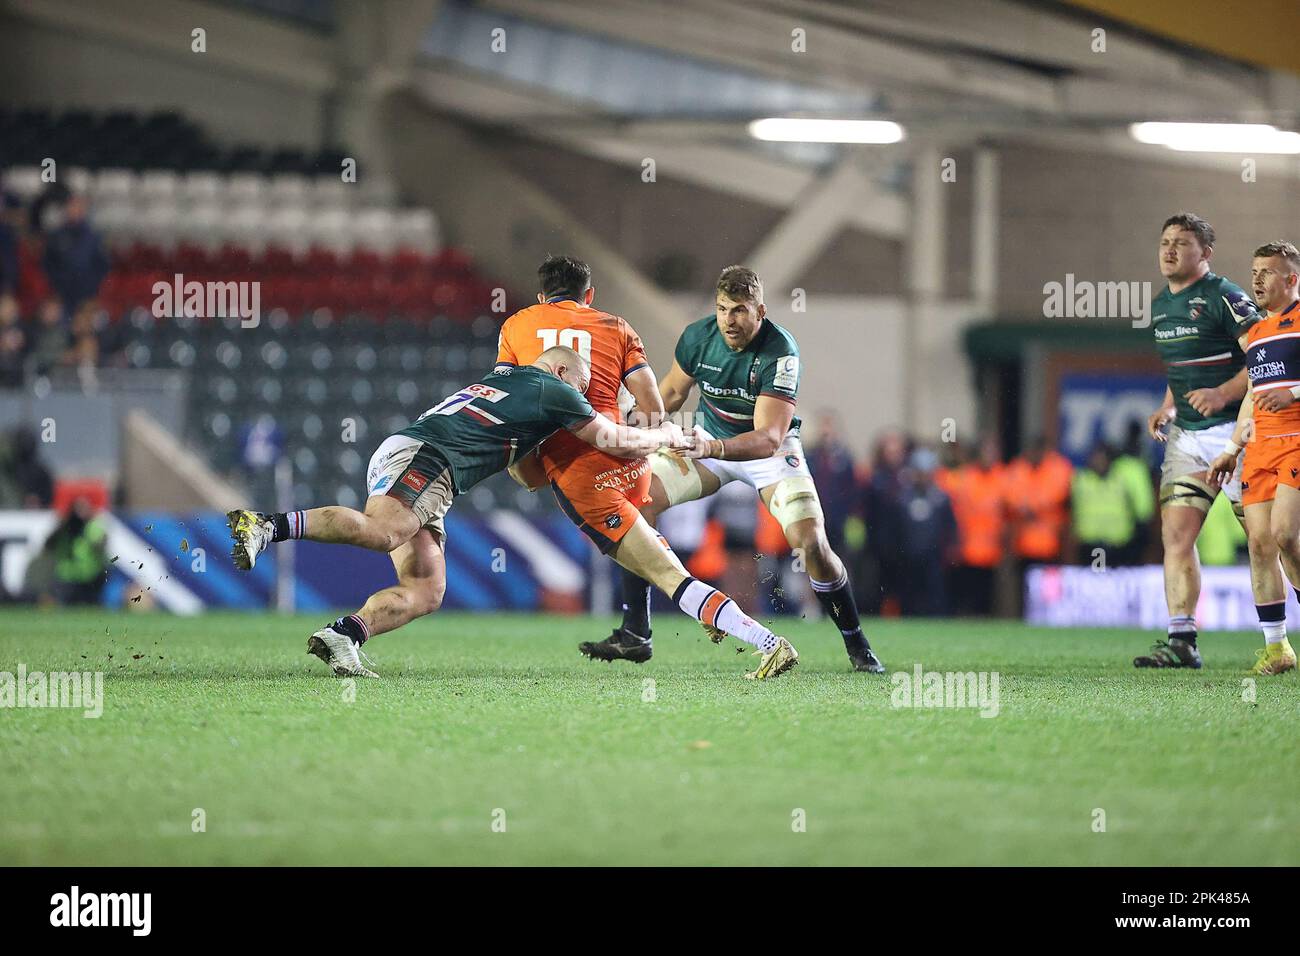 31.03.2022   Leicester, England. Rugby Union.                   Blair Kinghorn of Edinburgh gets tied up by the Tigers defence during the Heineken Champions Cup quarter final match played between Leicester Tigers and Edinburgh Rugby at the Mattioli Woods Welford Road Stadium, Leicester.  © Phil Hutchinson Stock Photo